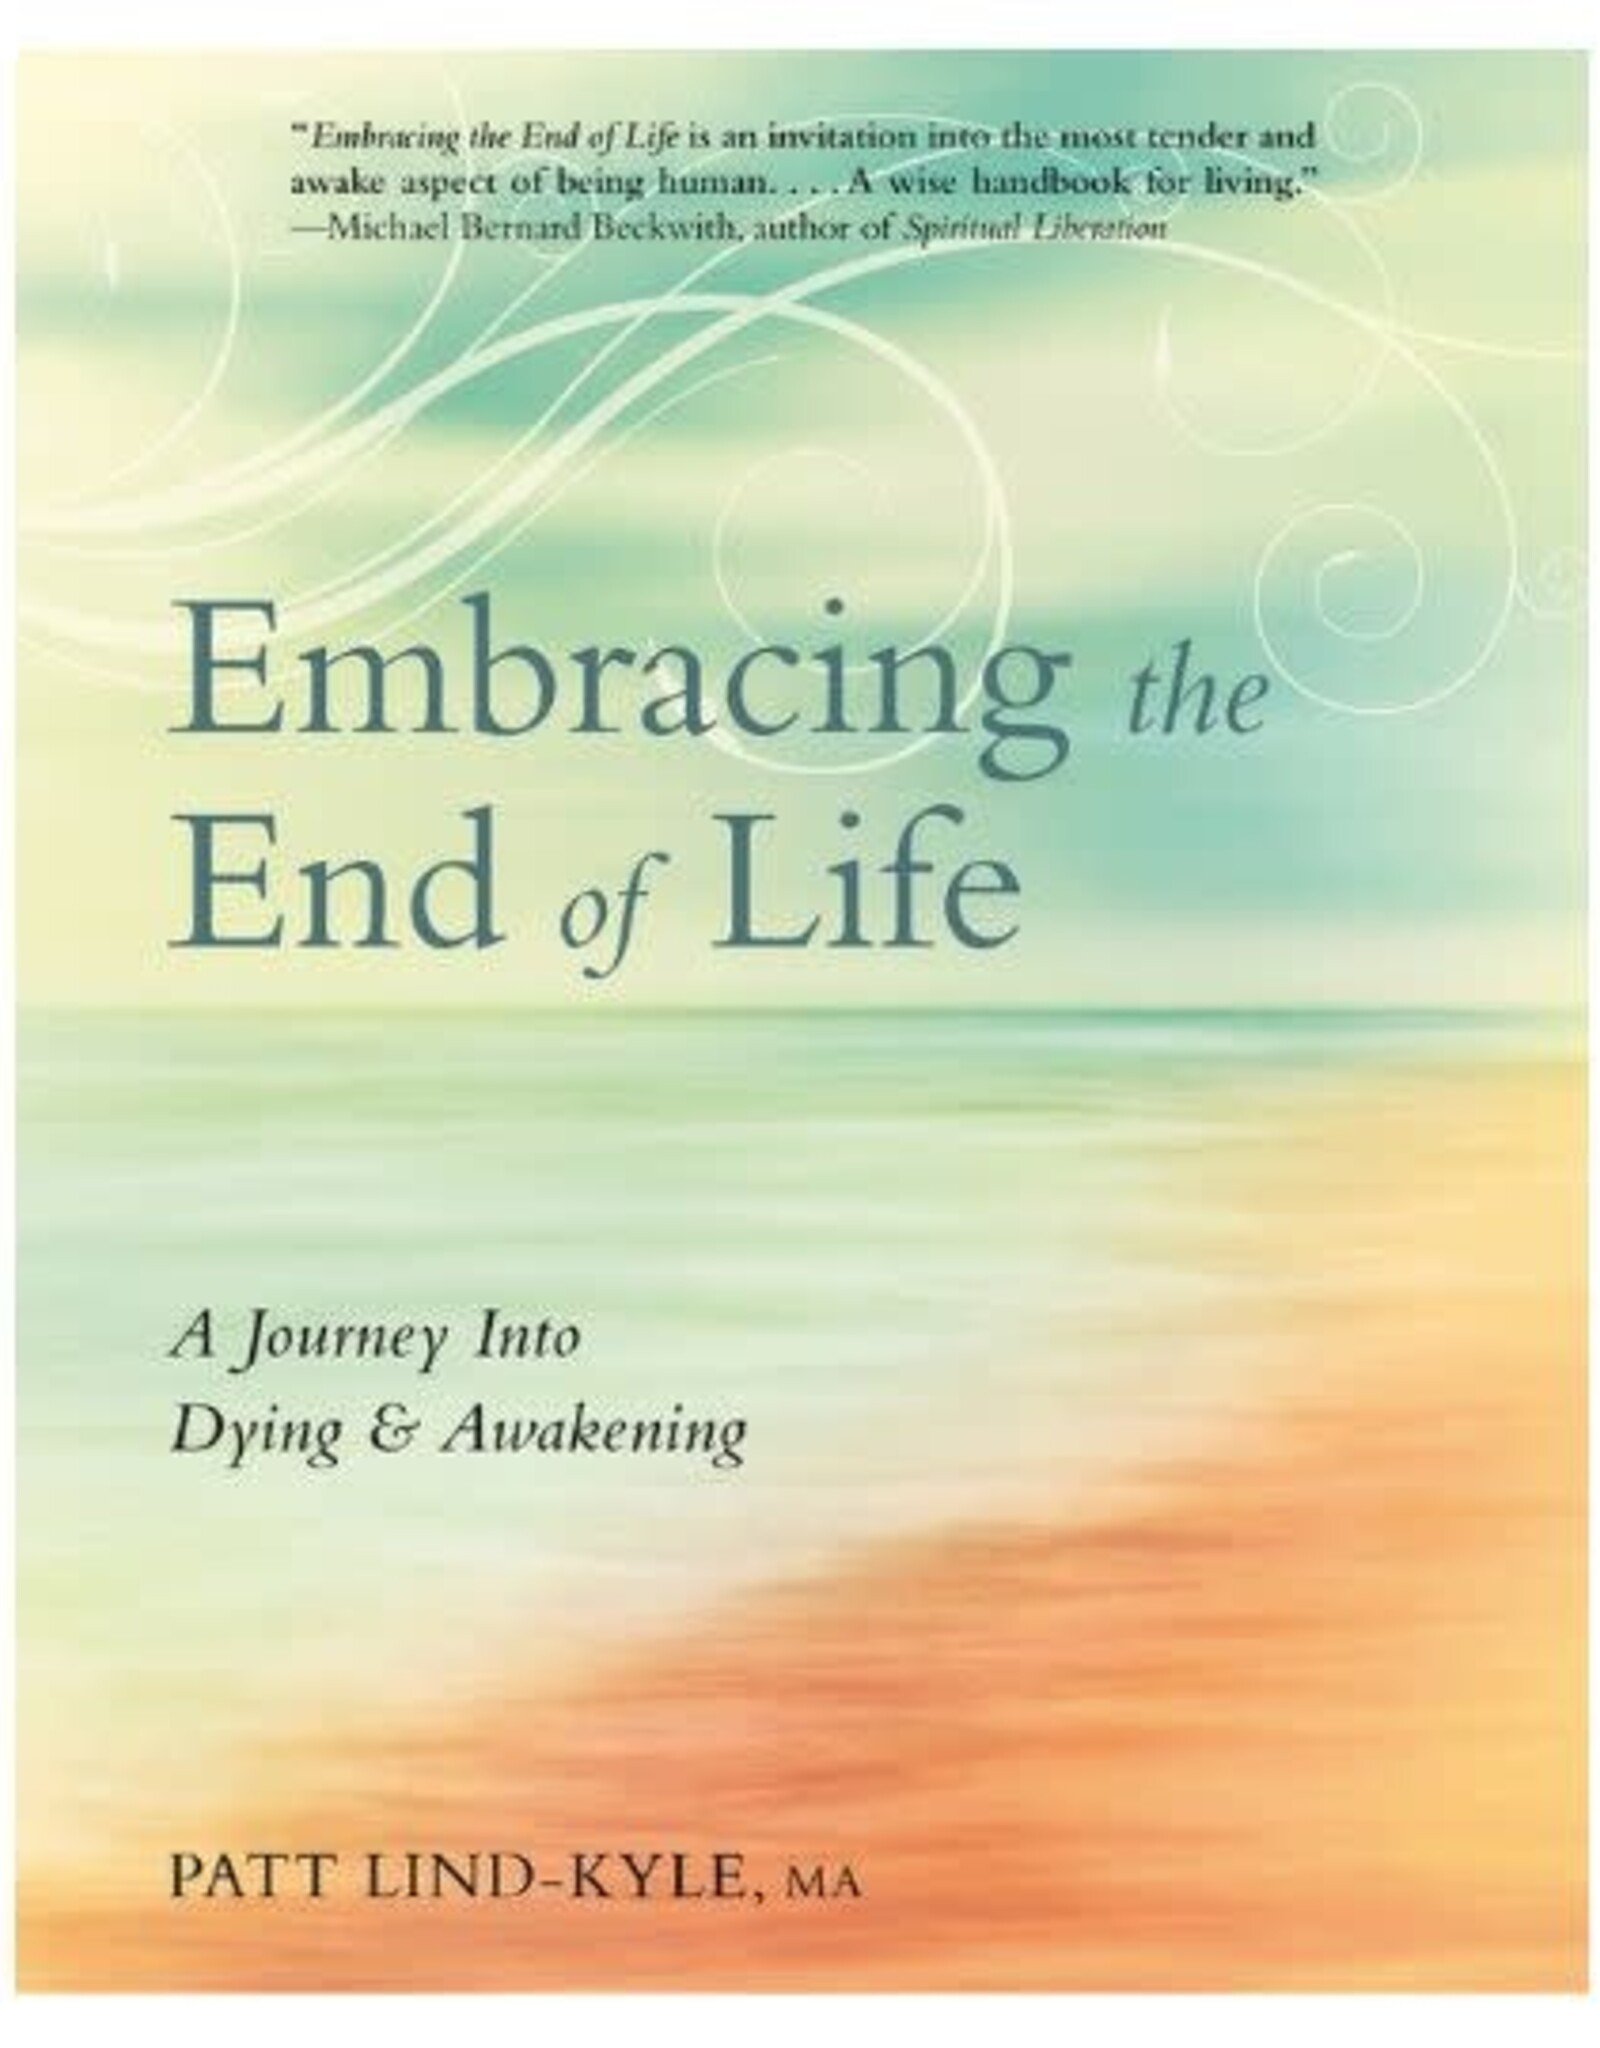 Embracing the End of Life by Patt Lind-Kyle